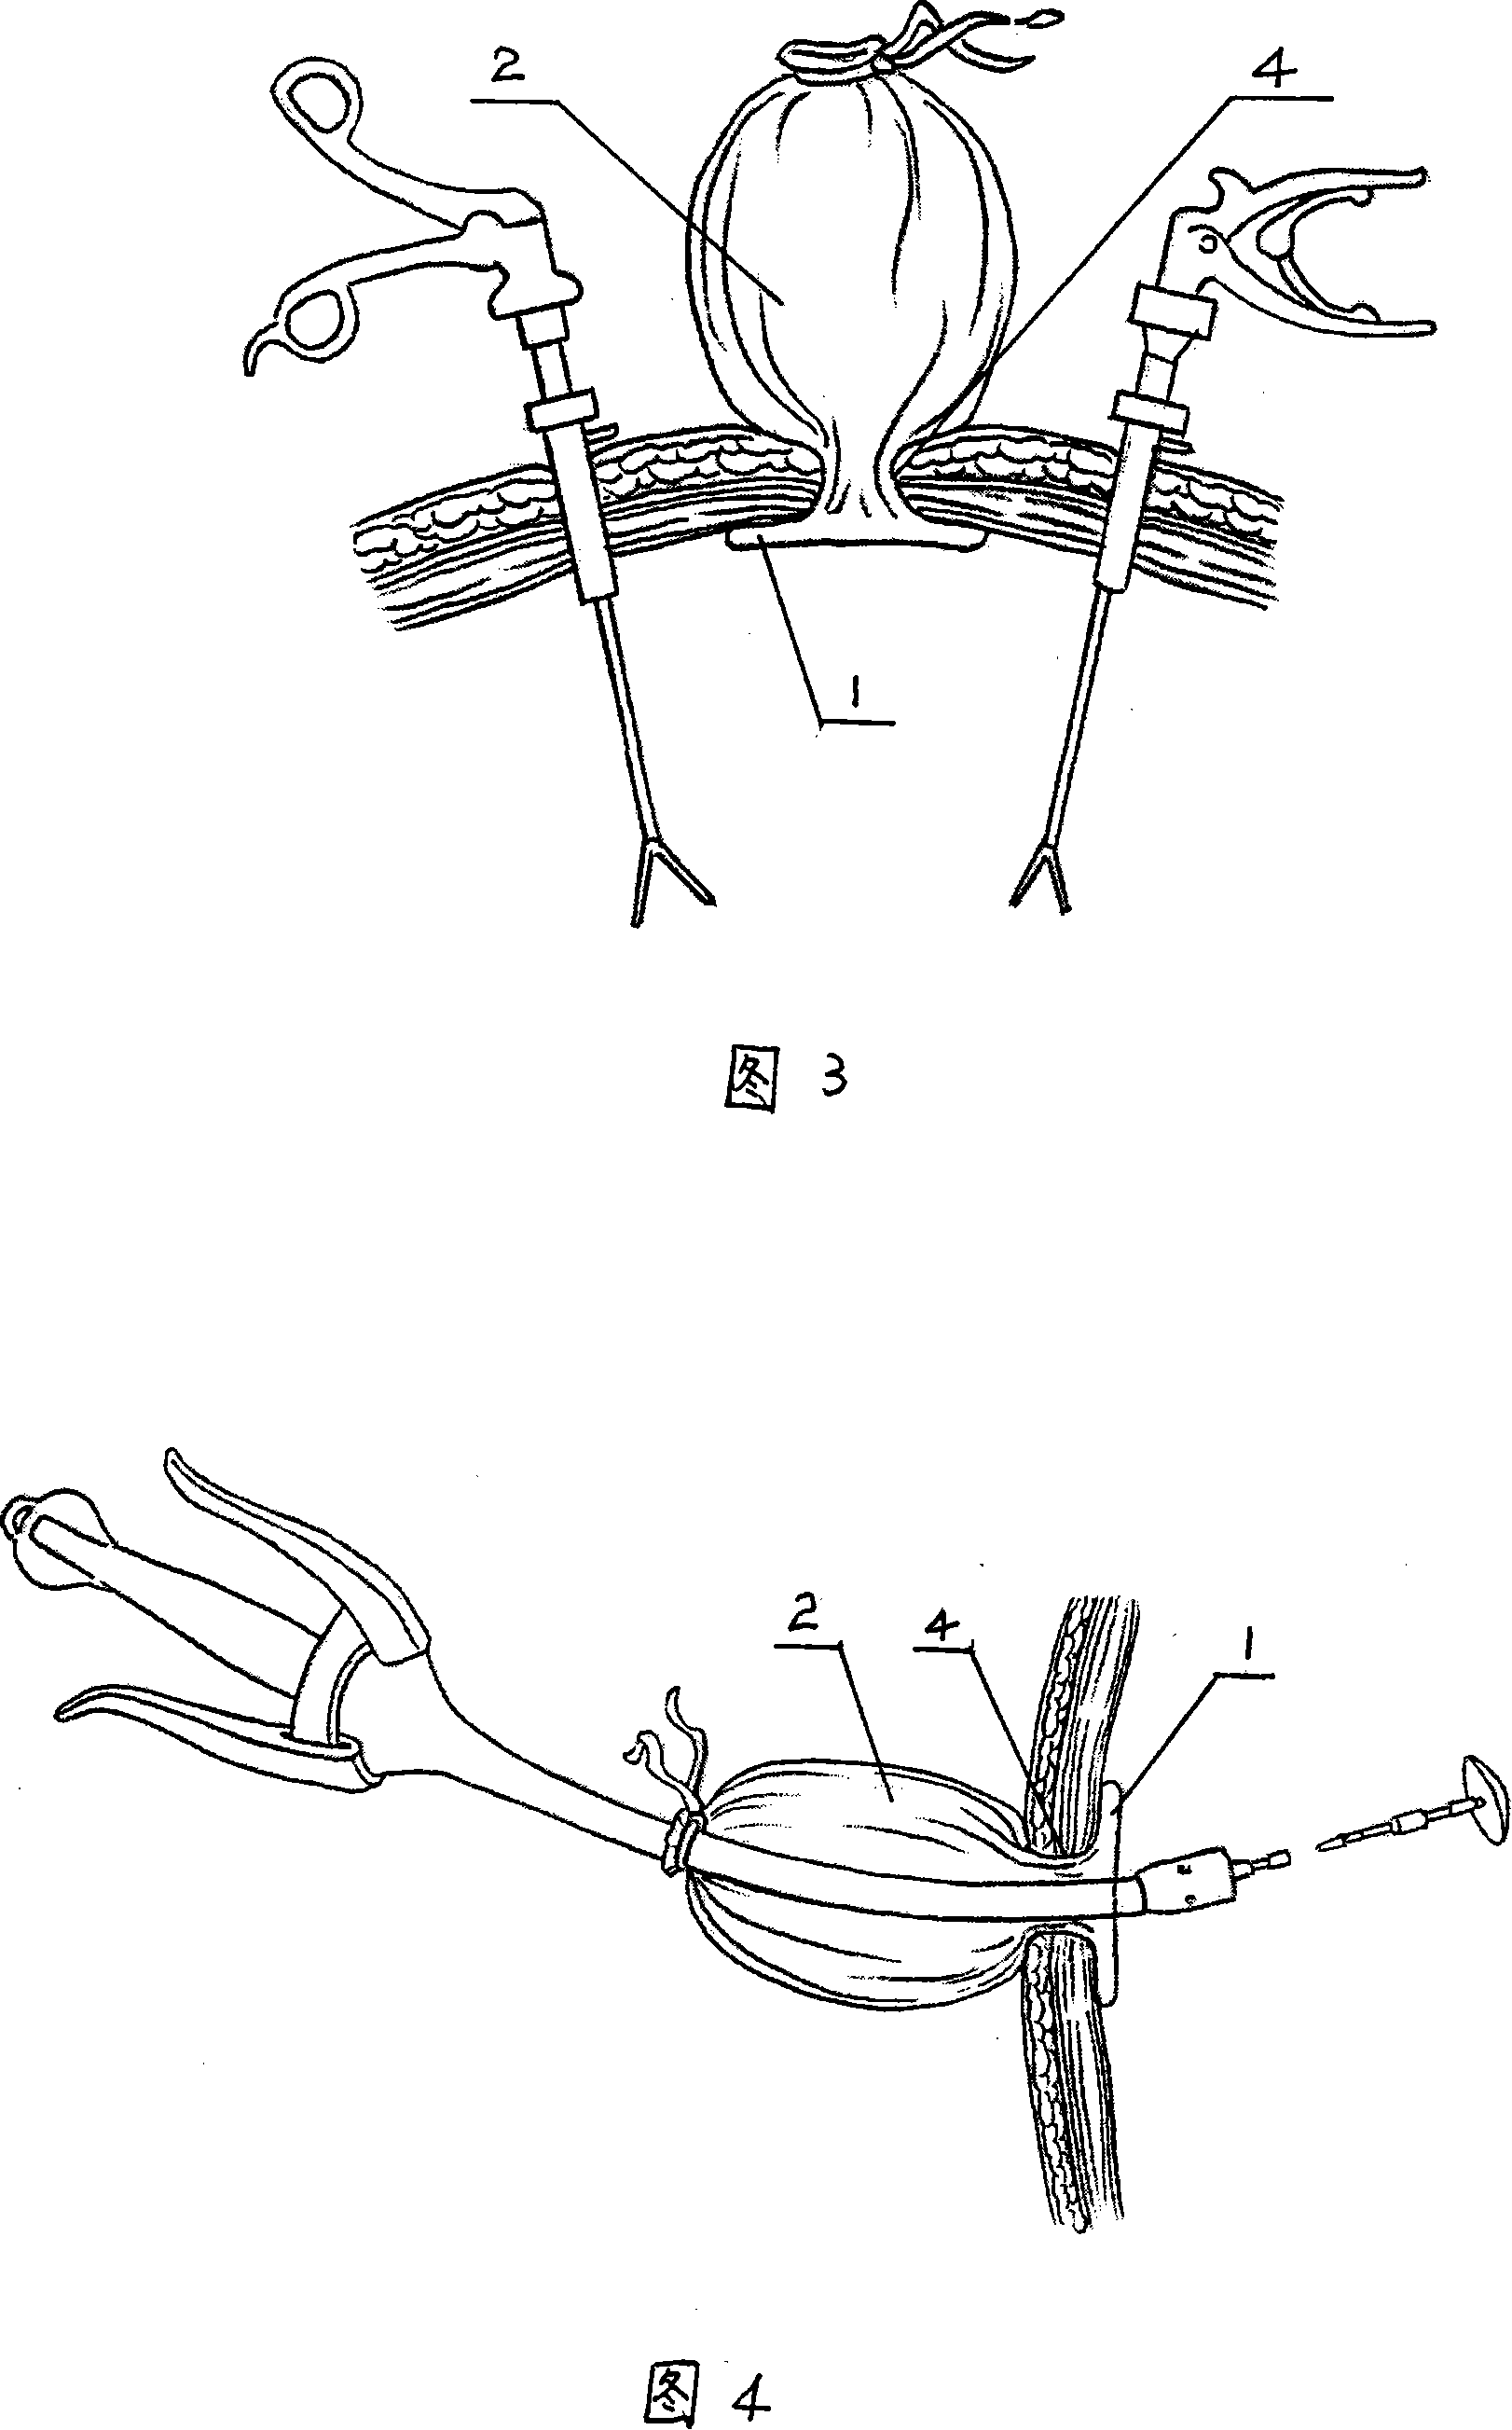 Device for sealing abdominal wall lancing for peritoneoscope operation